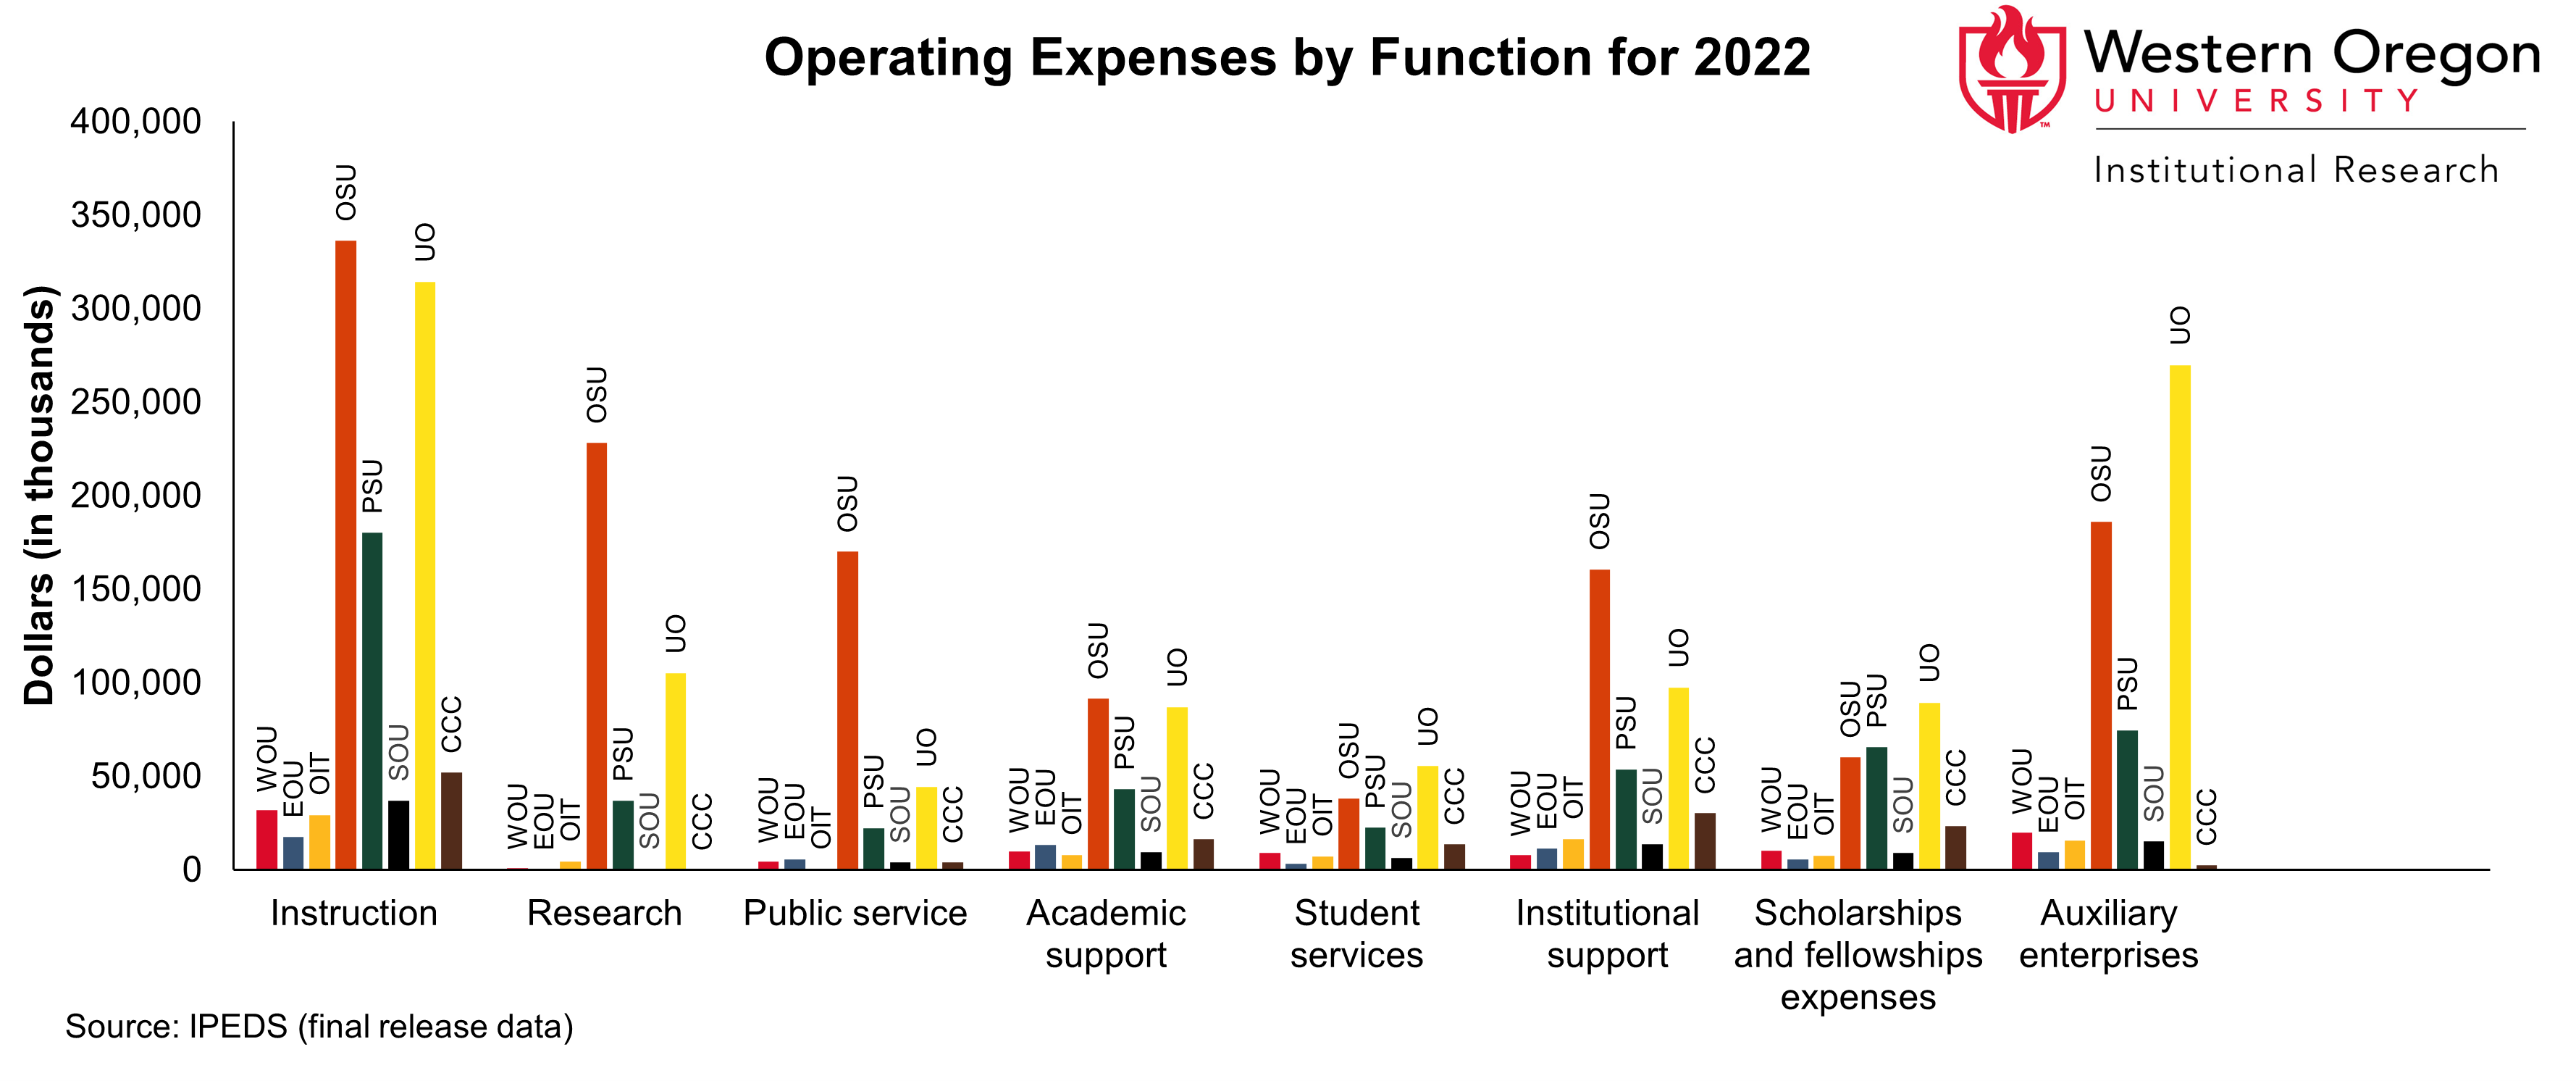 Bar graph of operating expenses at WOU and other Oregon Public Universities in fiscal year 2022, broken out by institution and function.